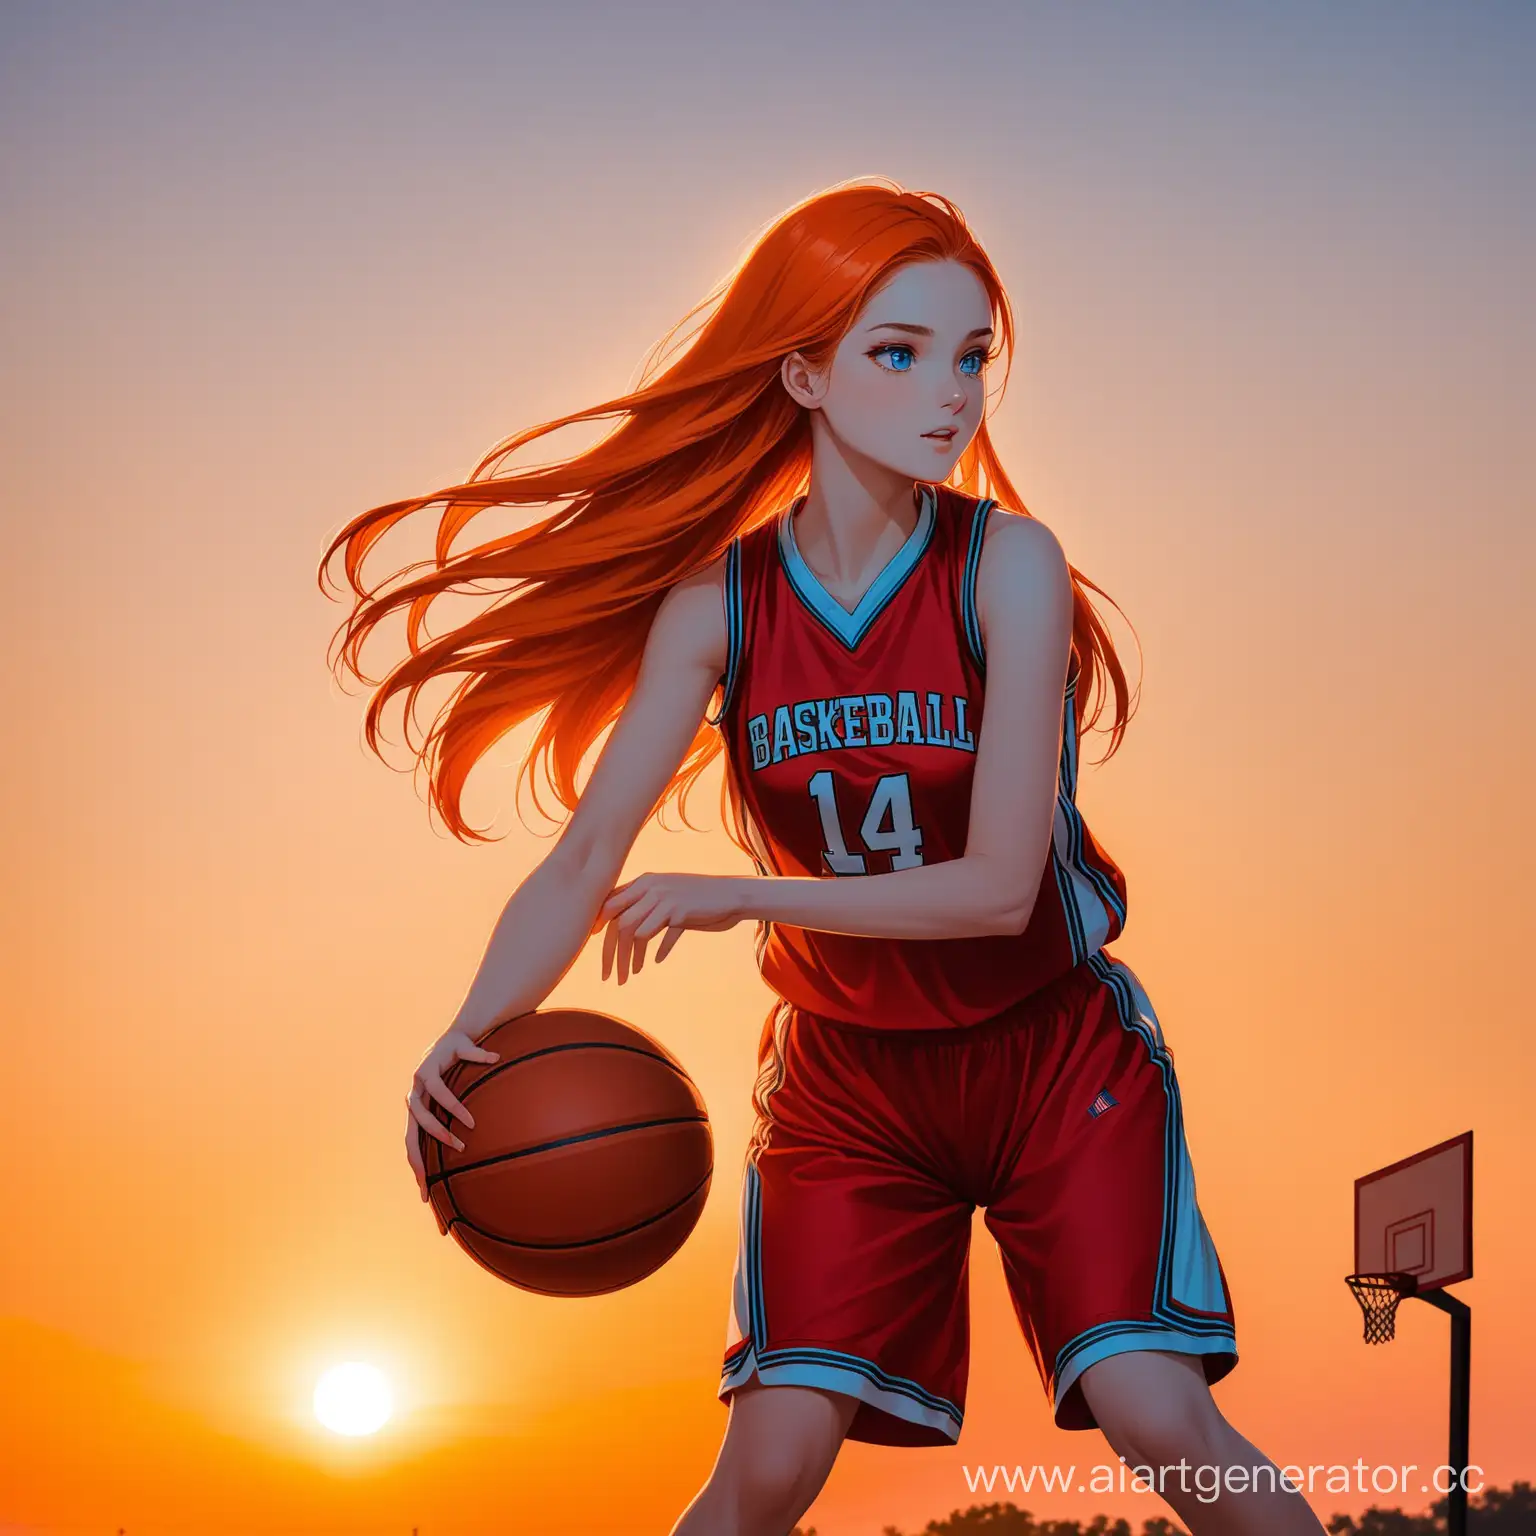 Girl with long orange hair and blue eyes in red basketball uniform at sunset playing basketball